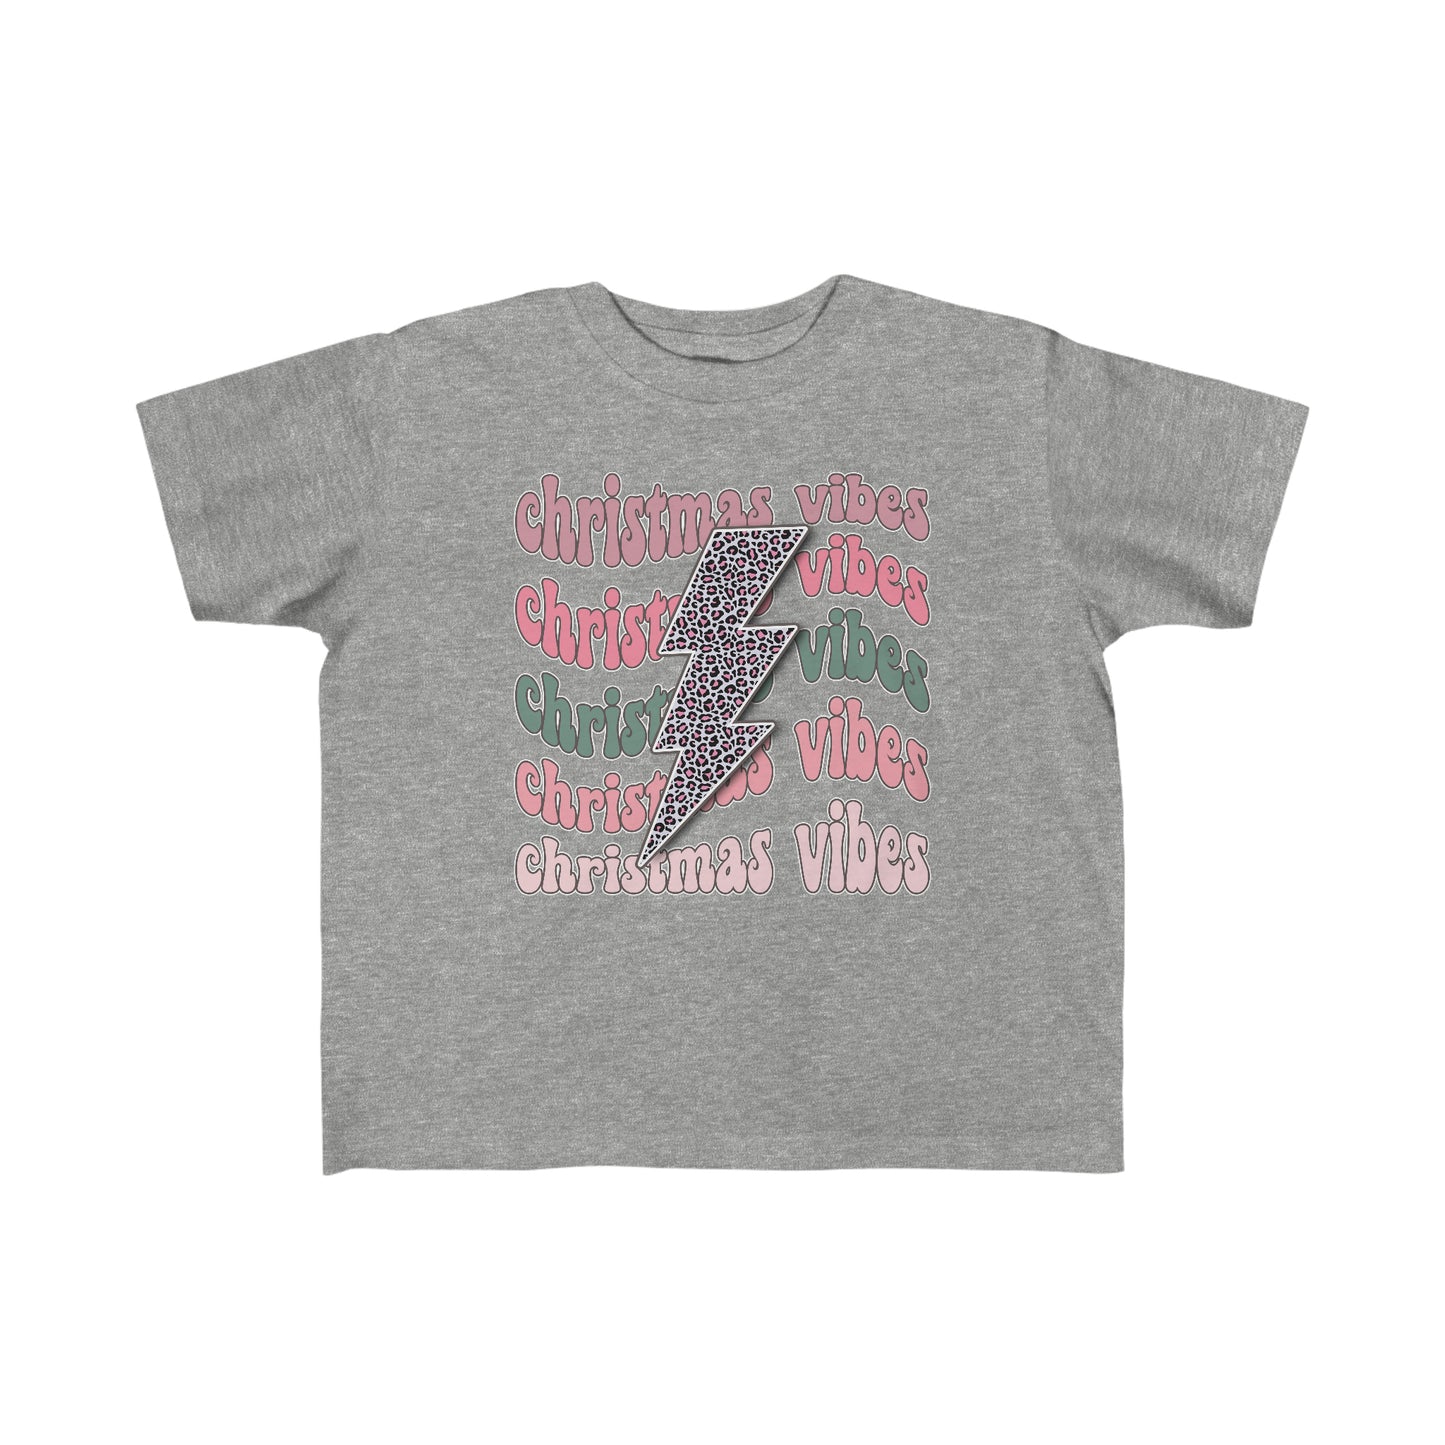 Christmas Vibes Toddler's Fine Jersey Tee